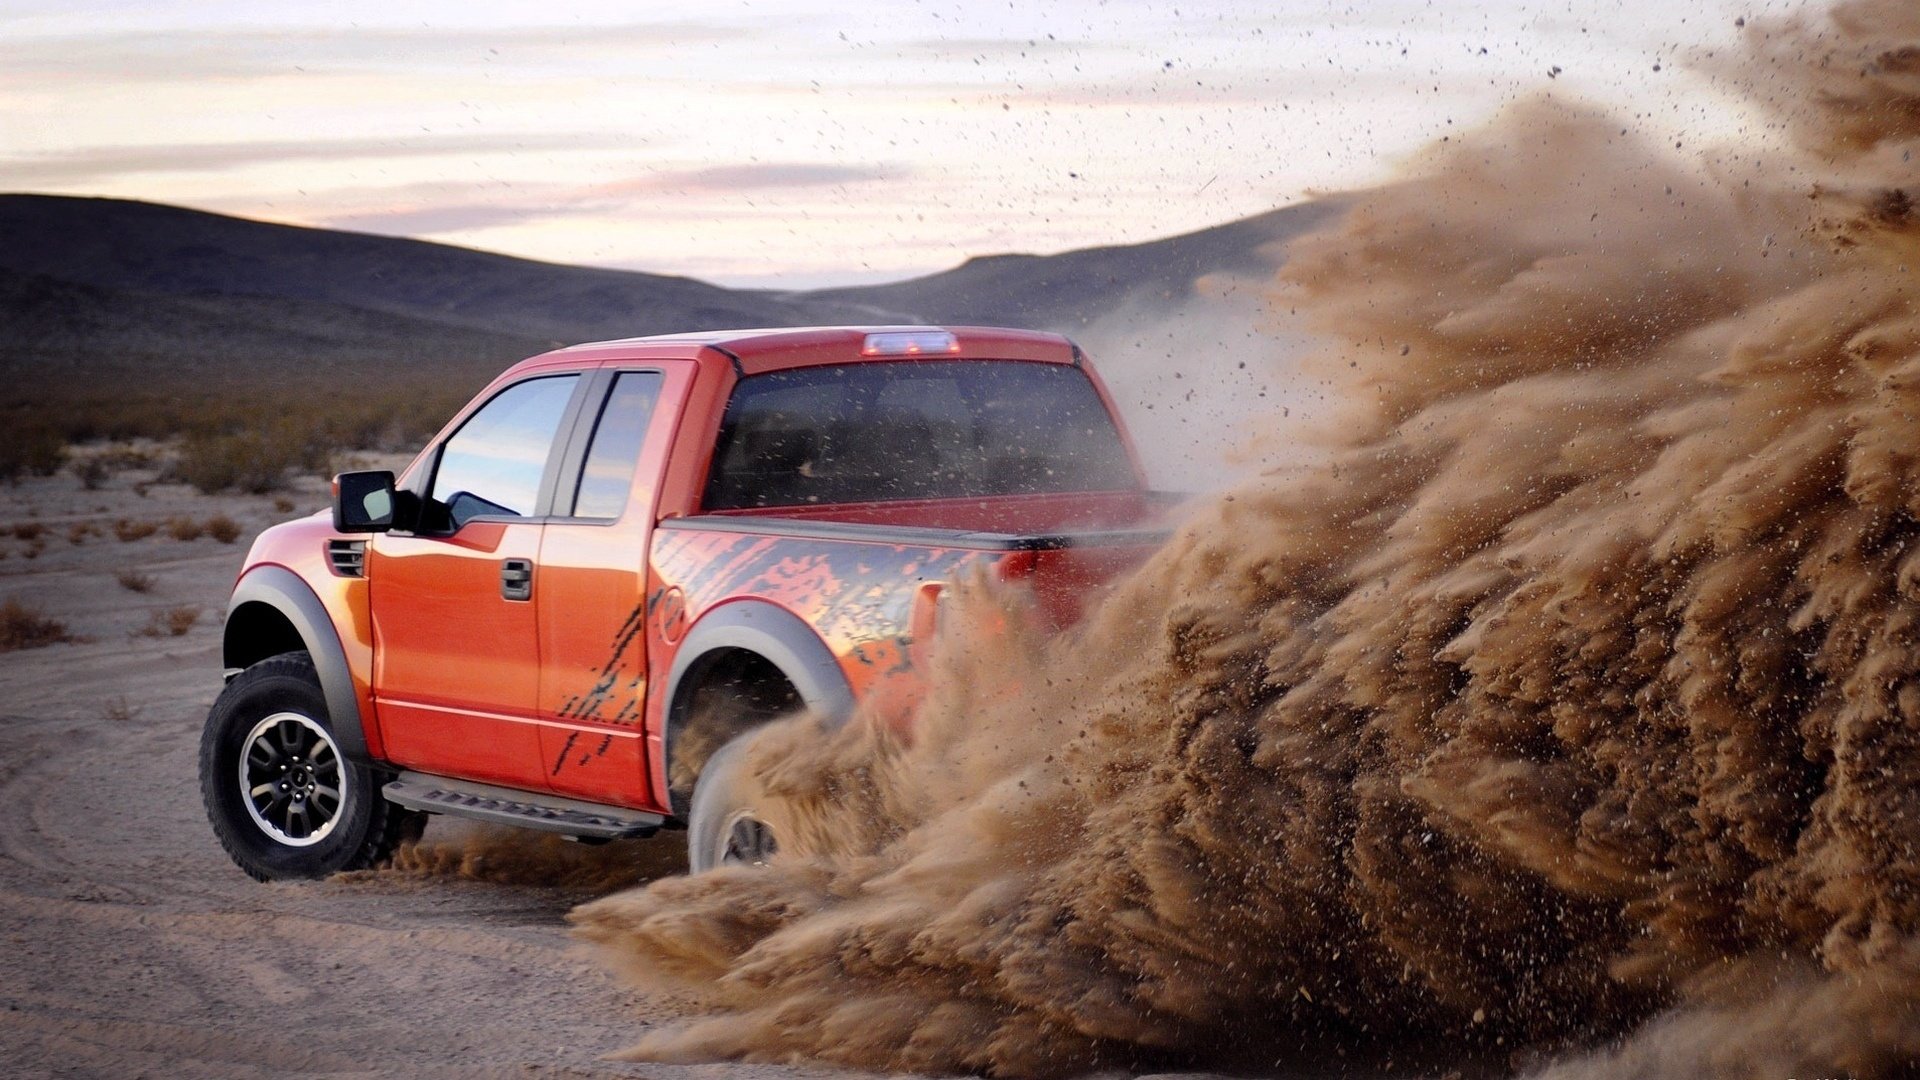 Best Ford Raptor wallpaper ID:275797 for High Resolution hd 1080p computer